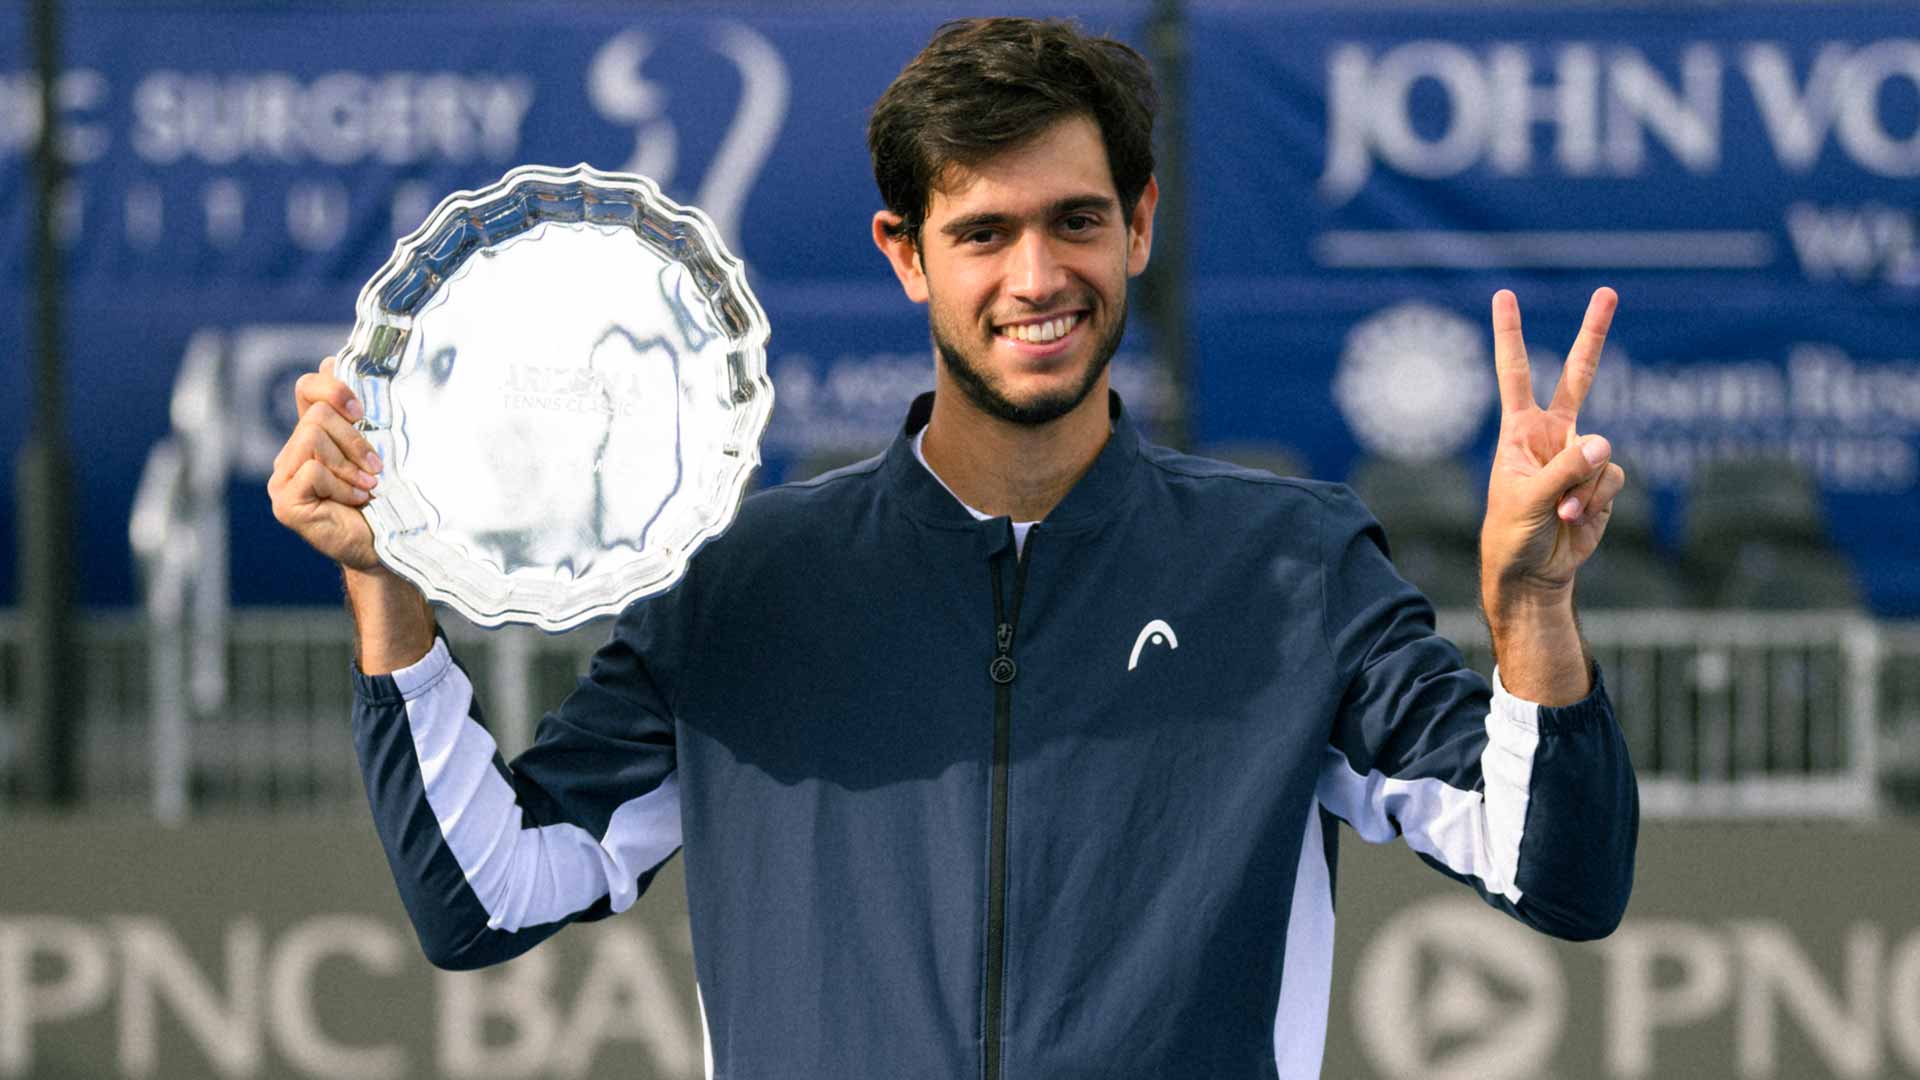 Nuno Borges wins the ATP Challenger Tour 175 title in Phoenix for a second consecutive year.